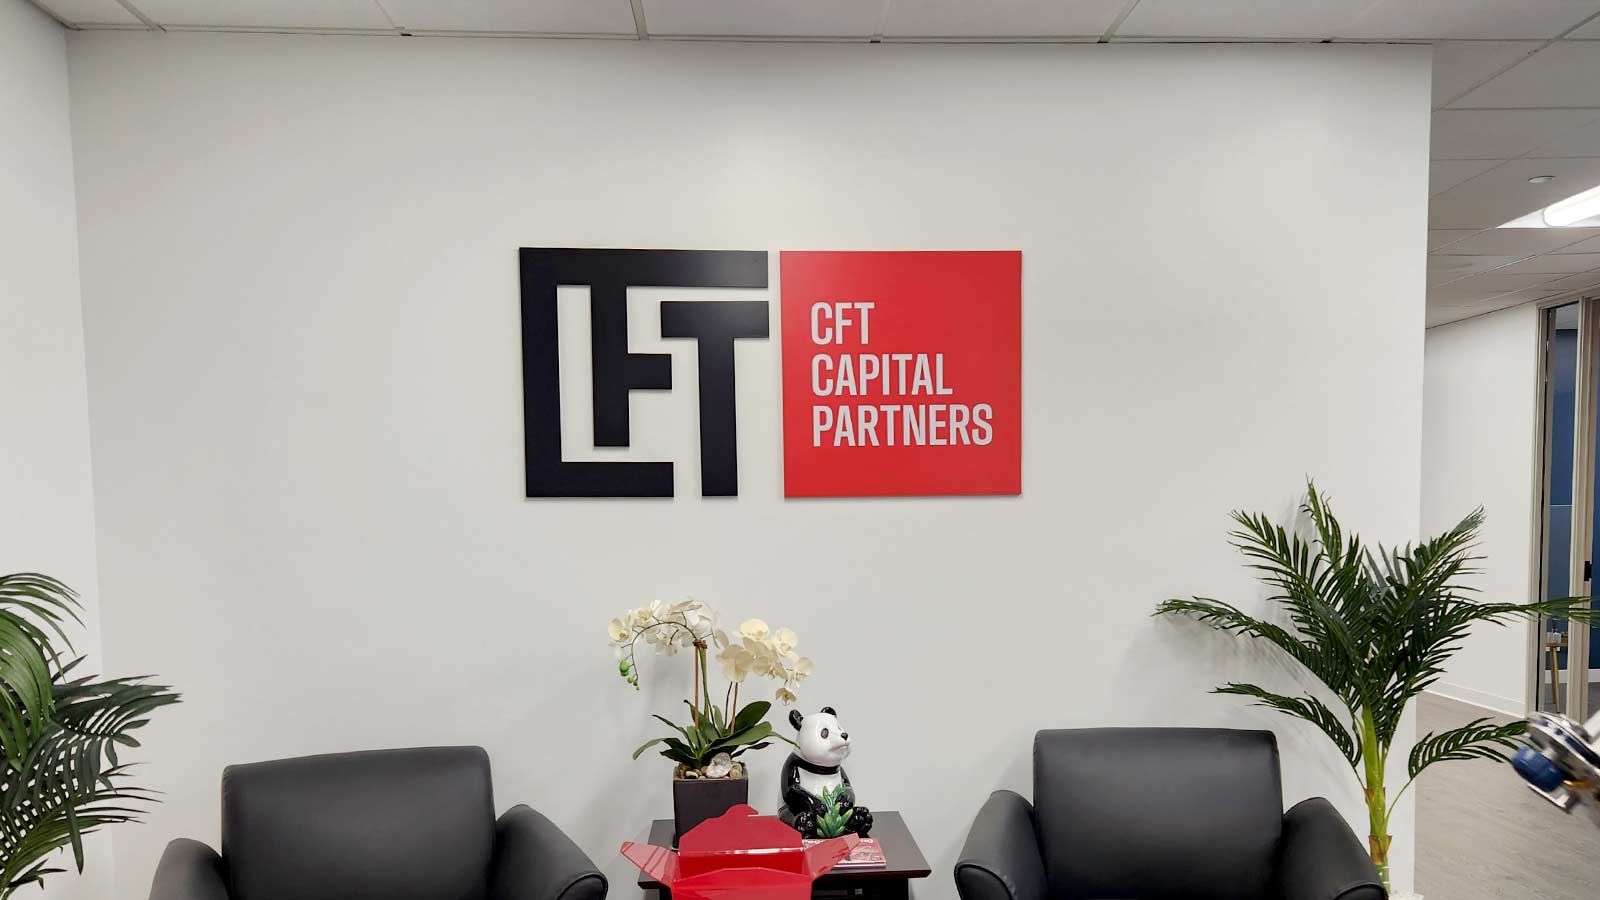 CFT Capital Partners acrylic signs attached to the wall